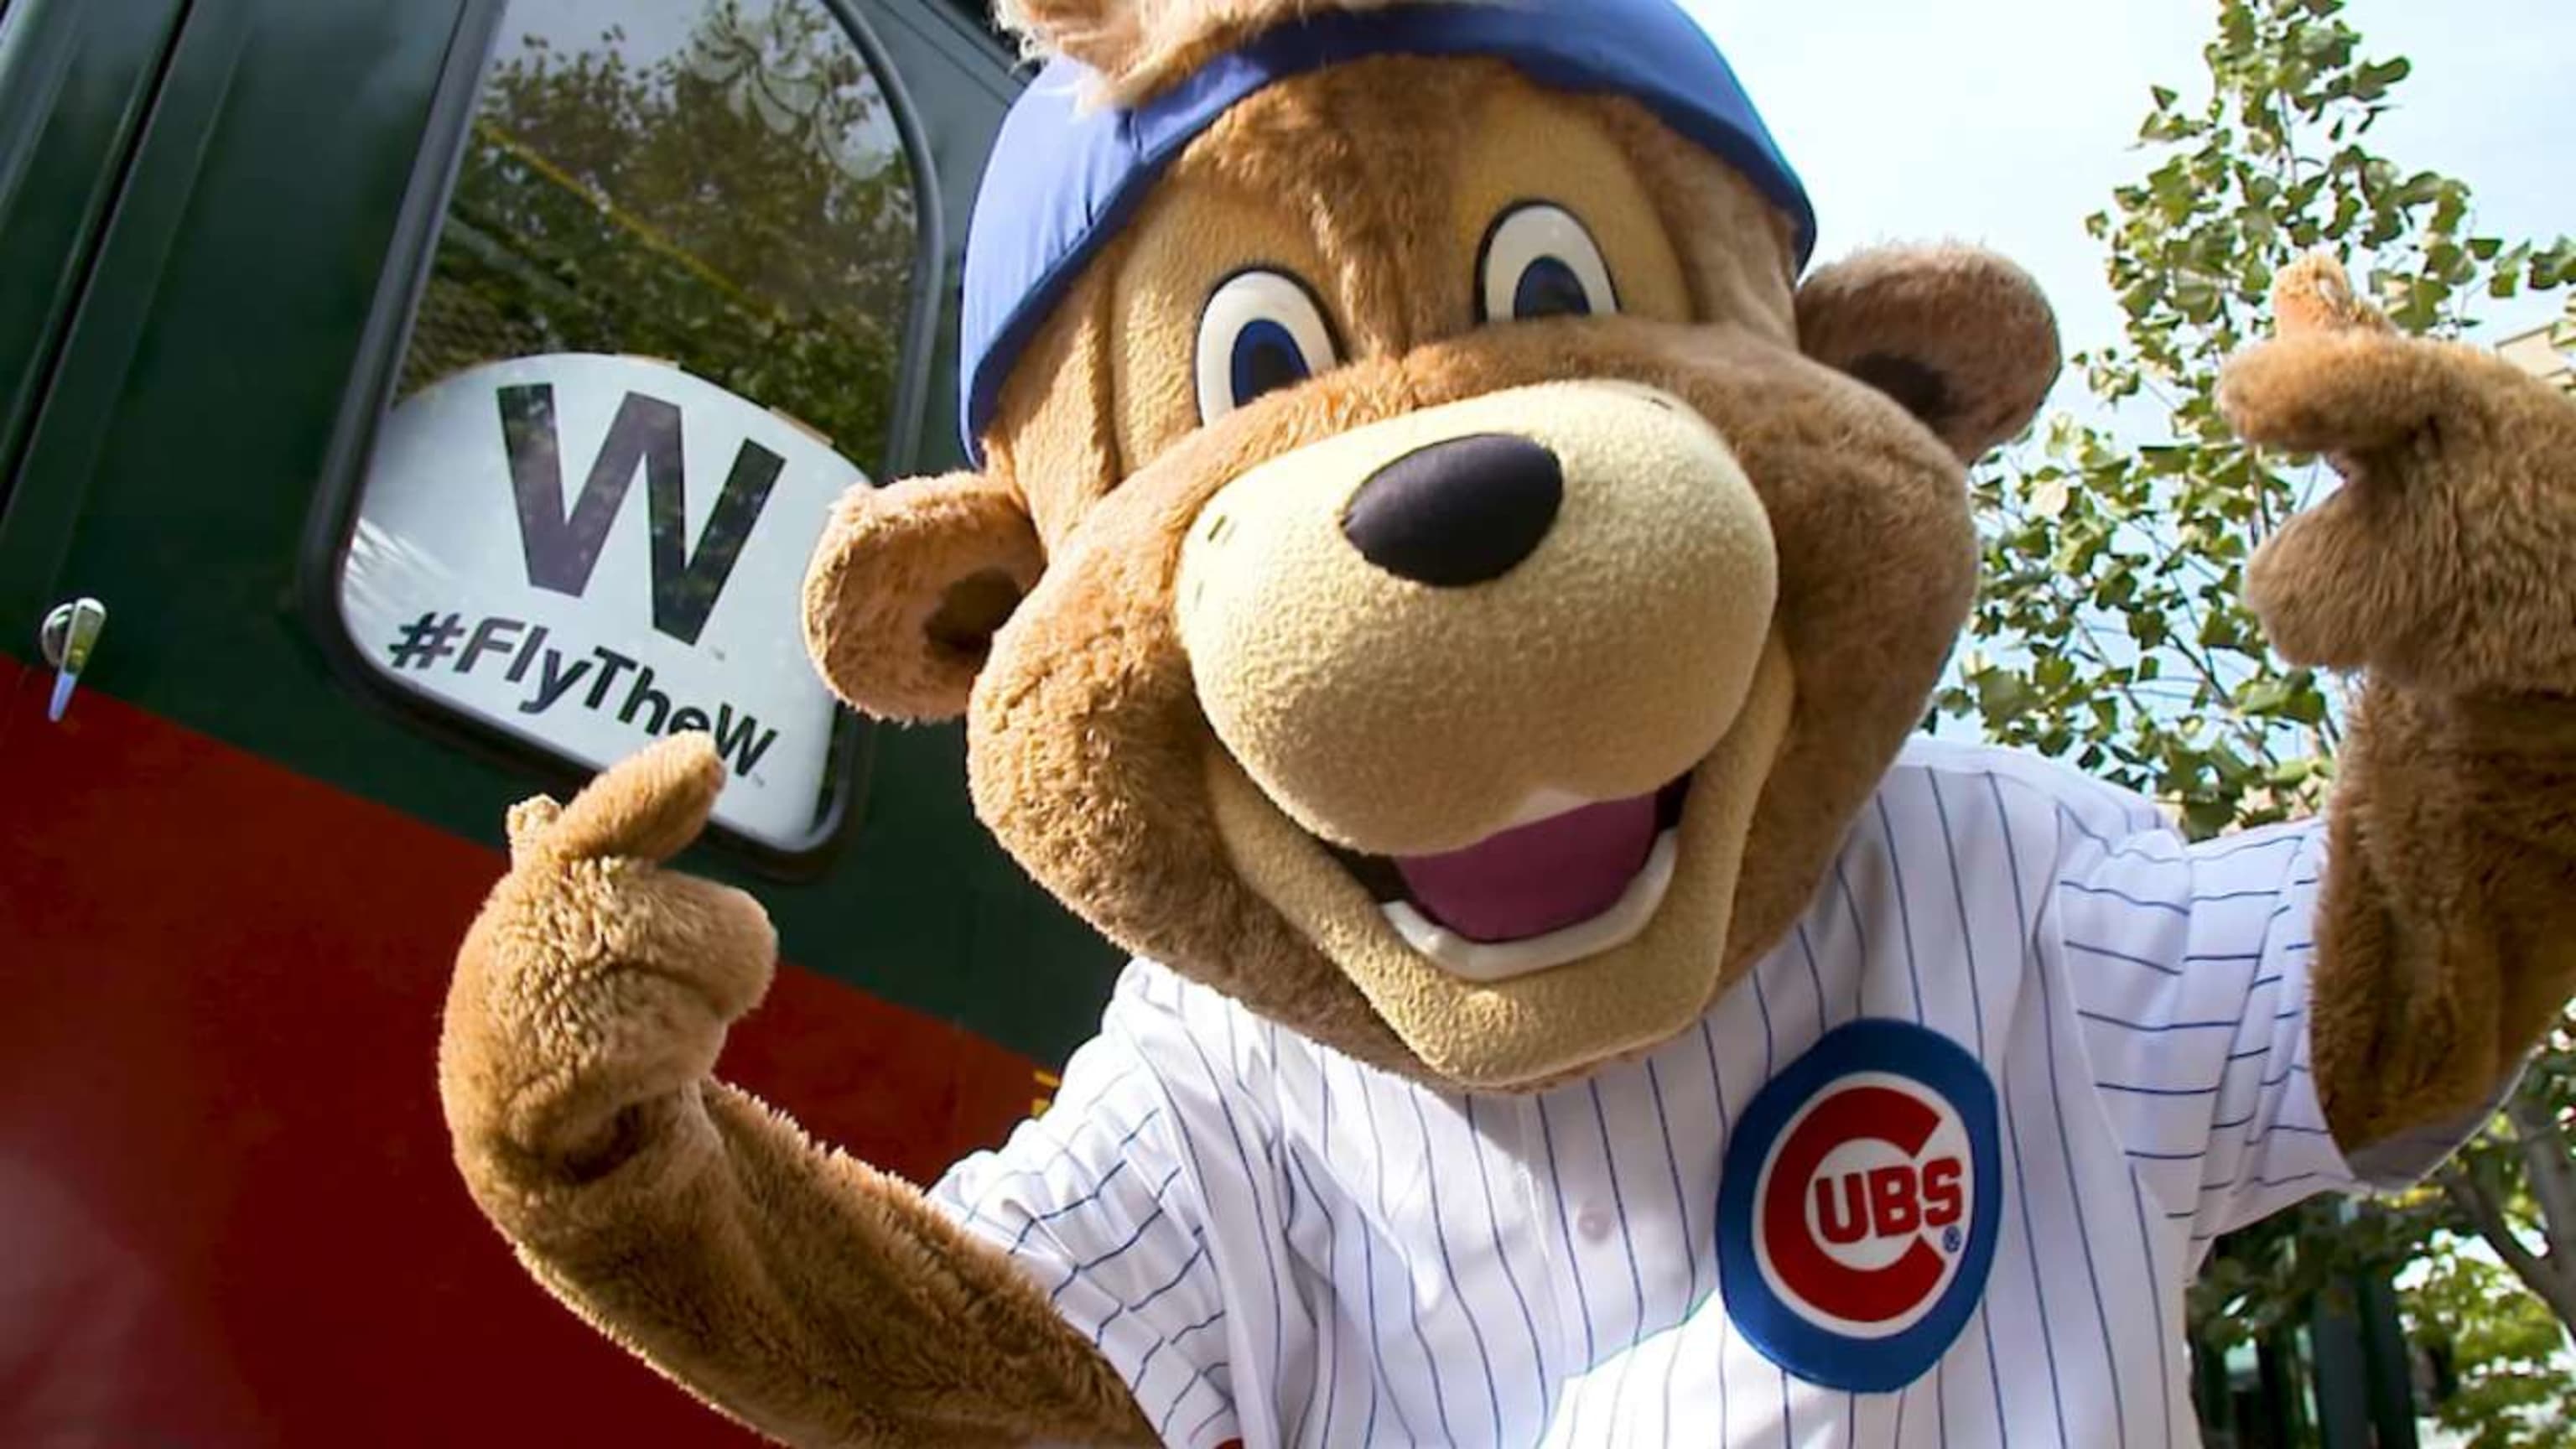 The origins of Chicago's sports mascots